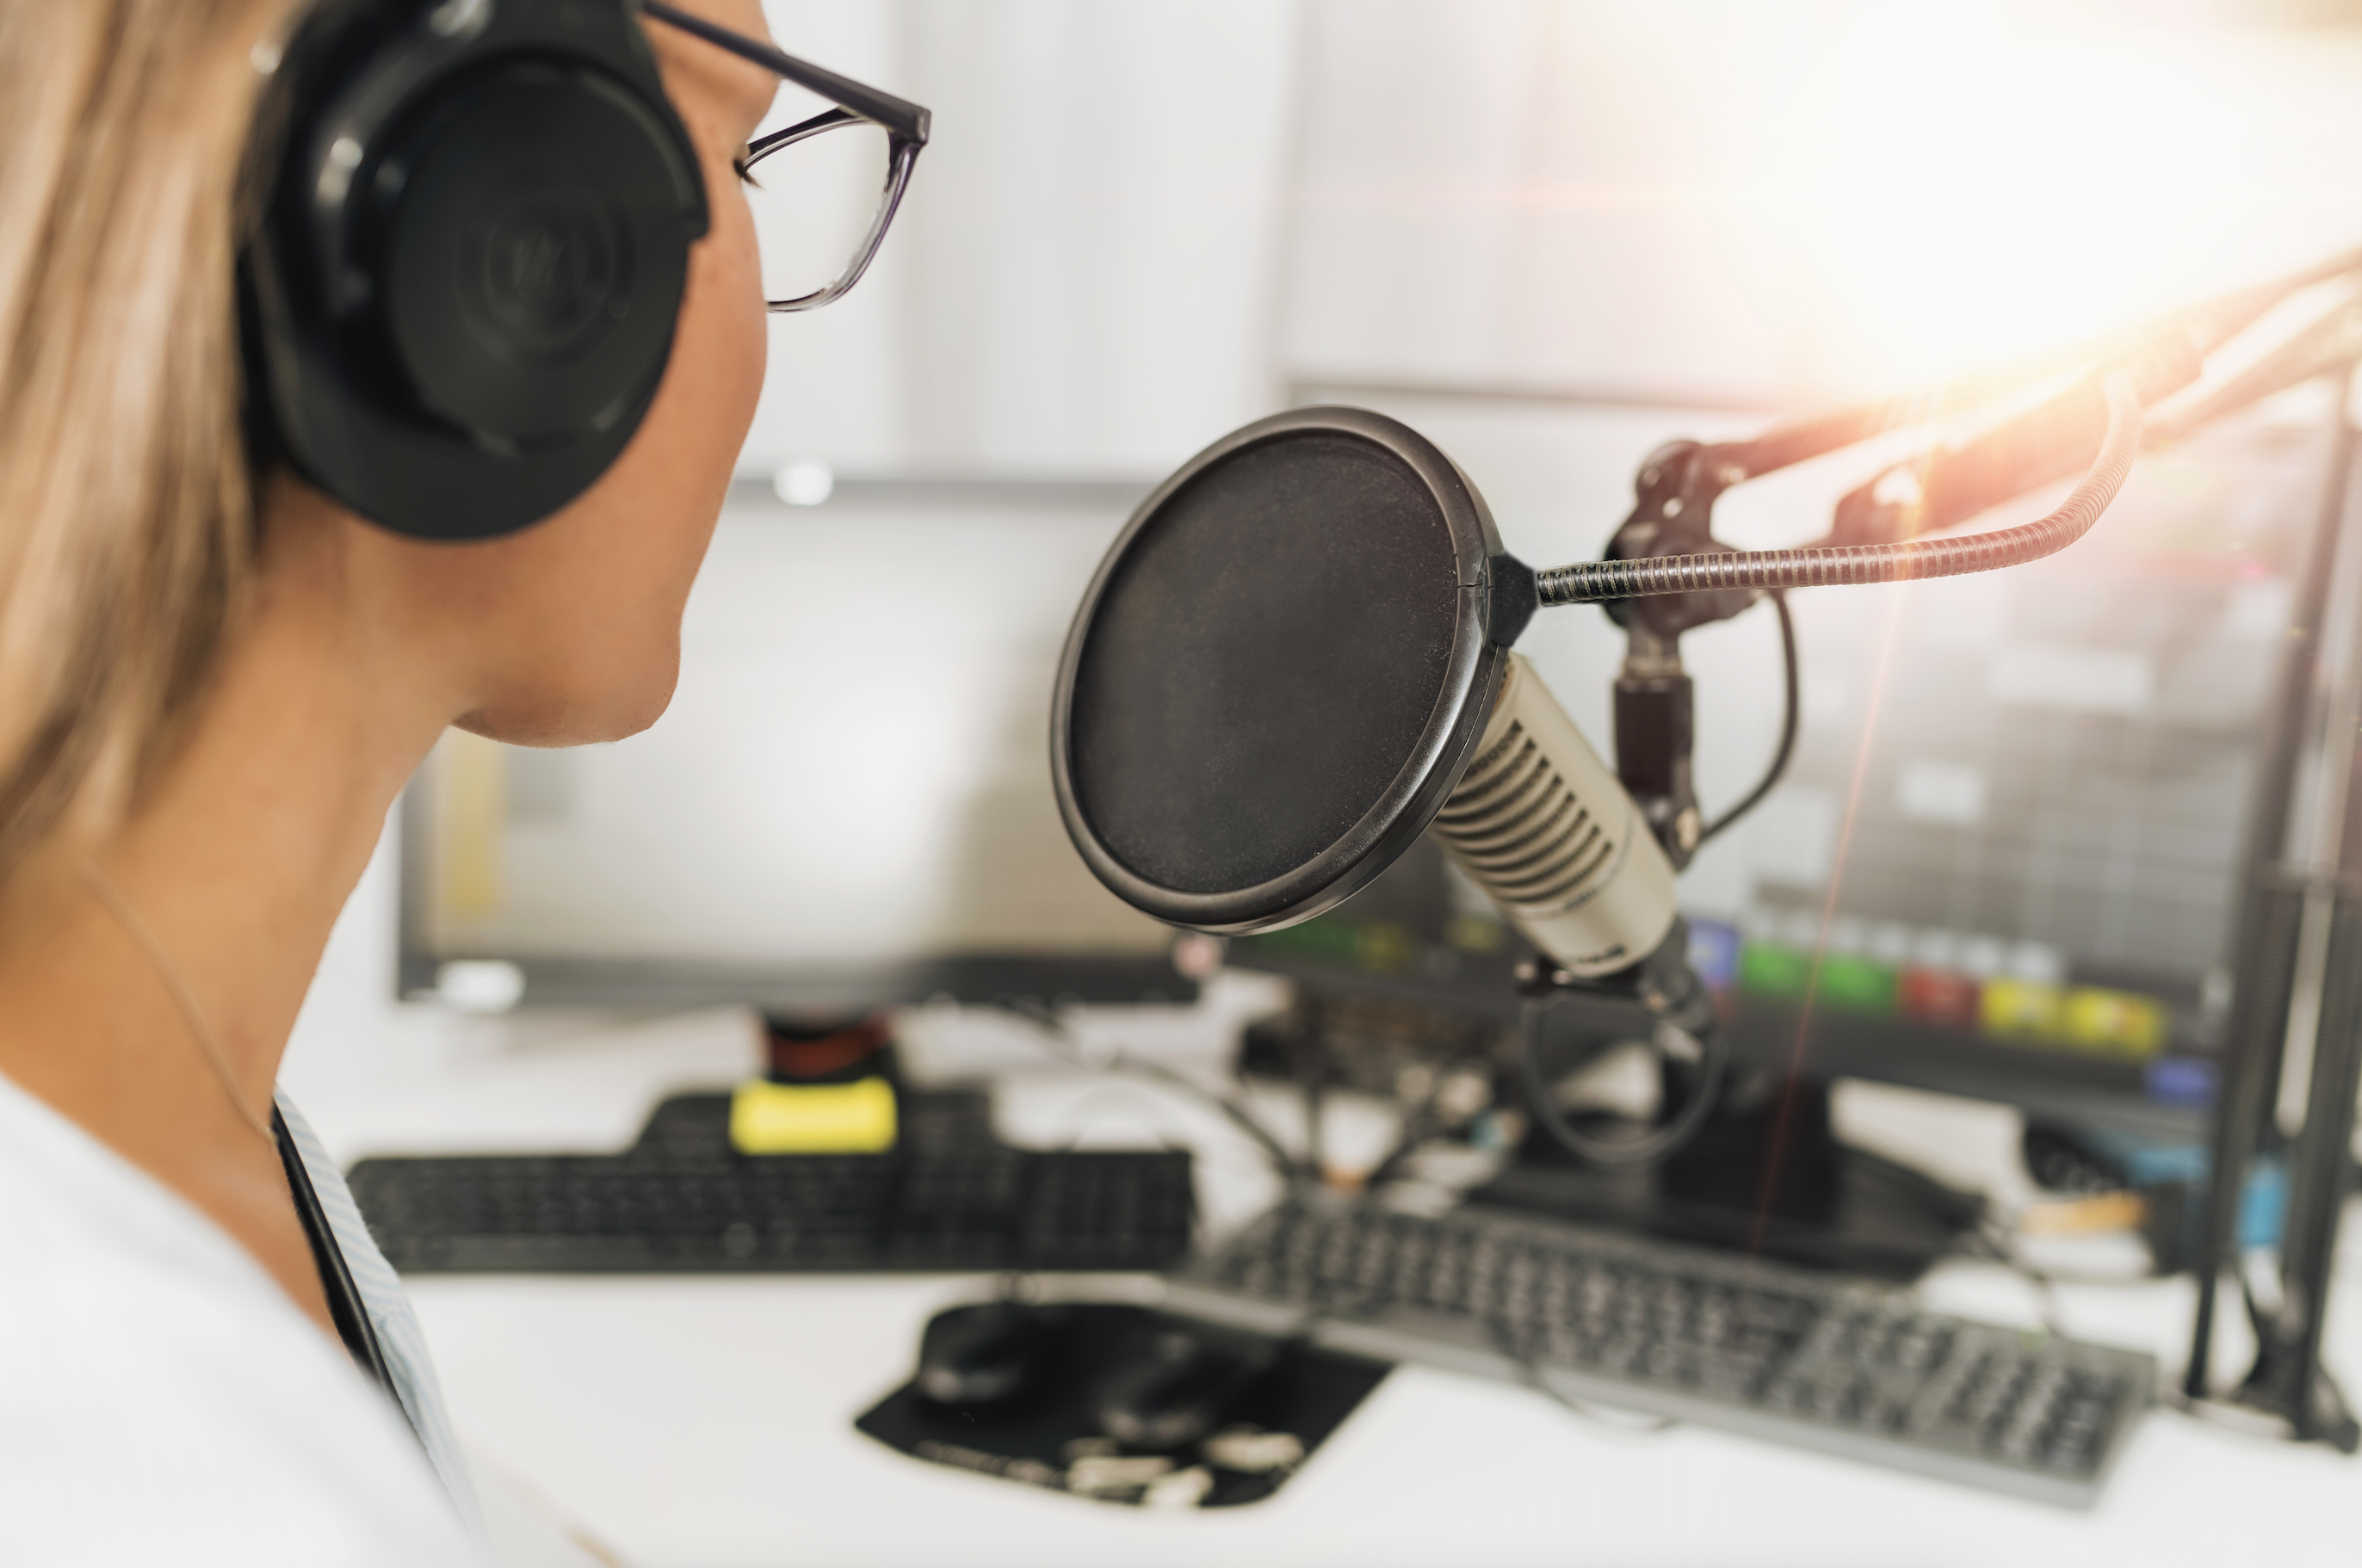 Broadcasters & Podcasters – Competitors or Collaborators?